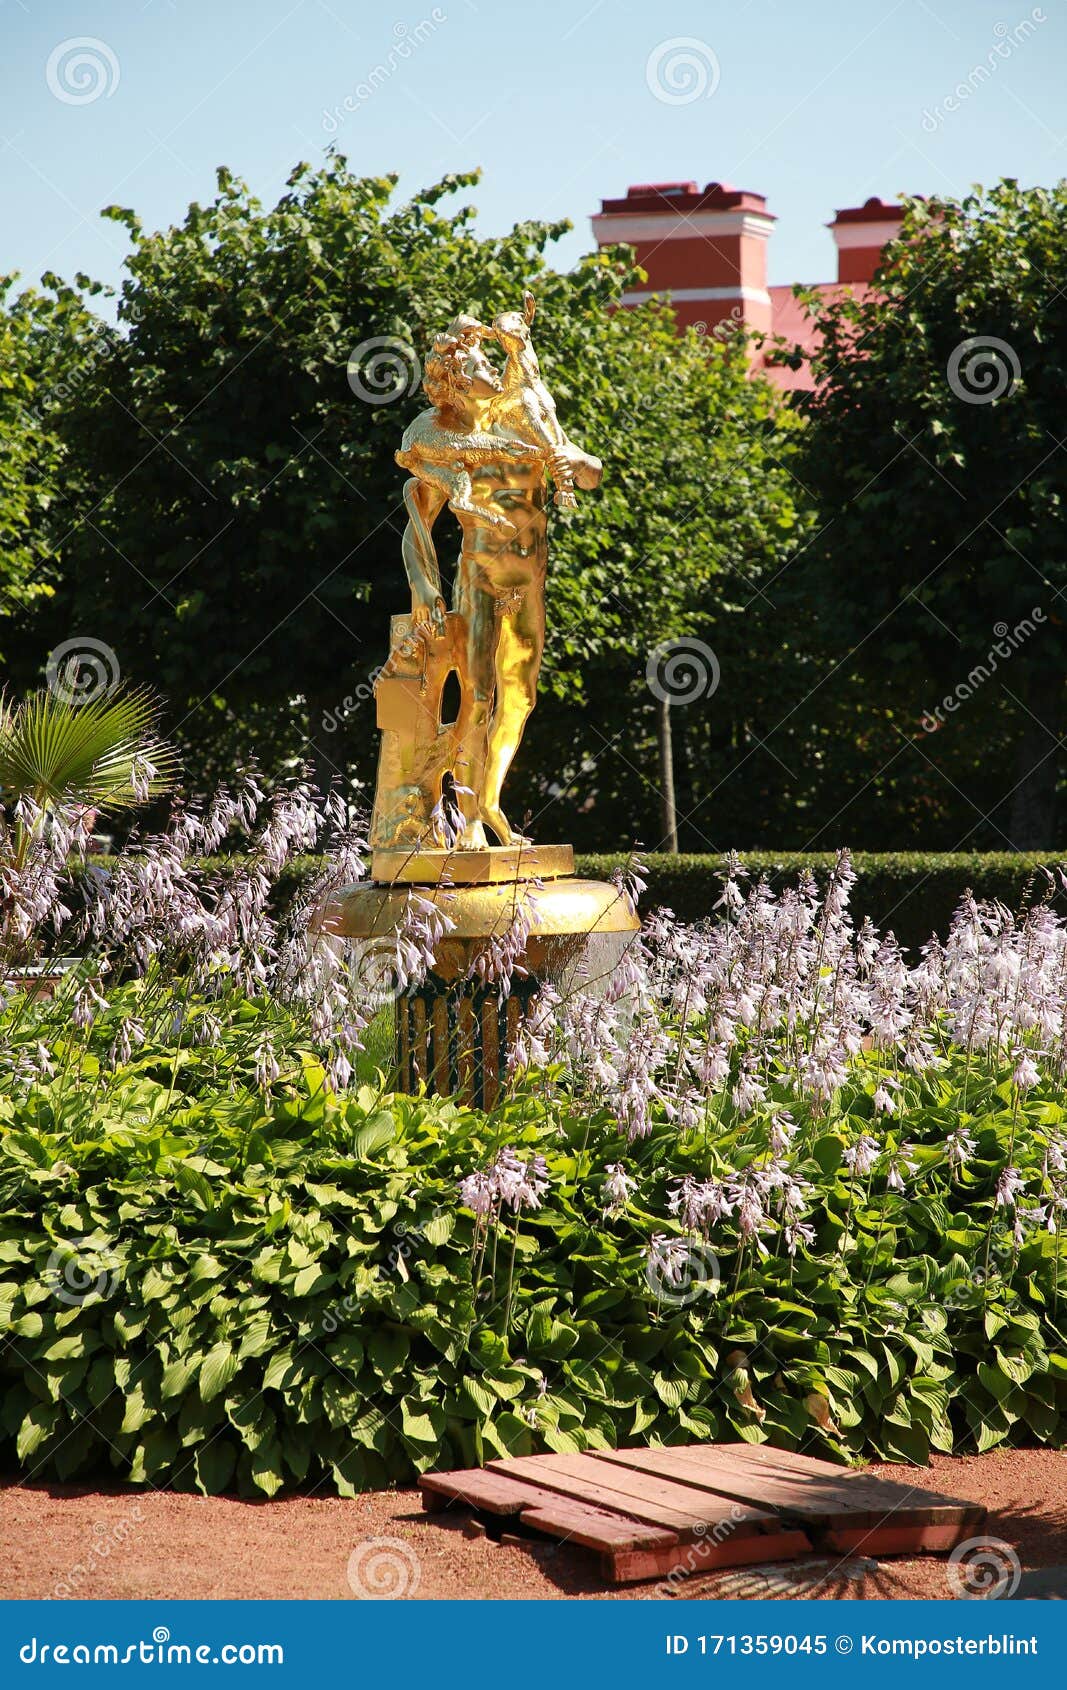 Bell Fountain With A Gilded Figure Among The Flowers In The Garden